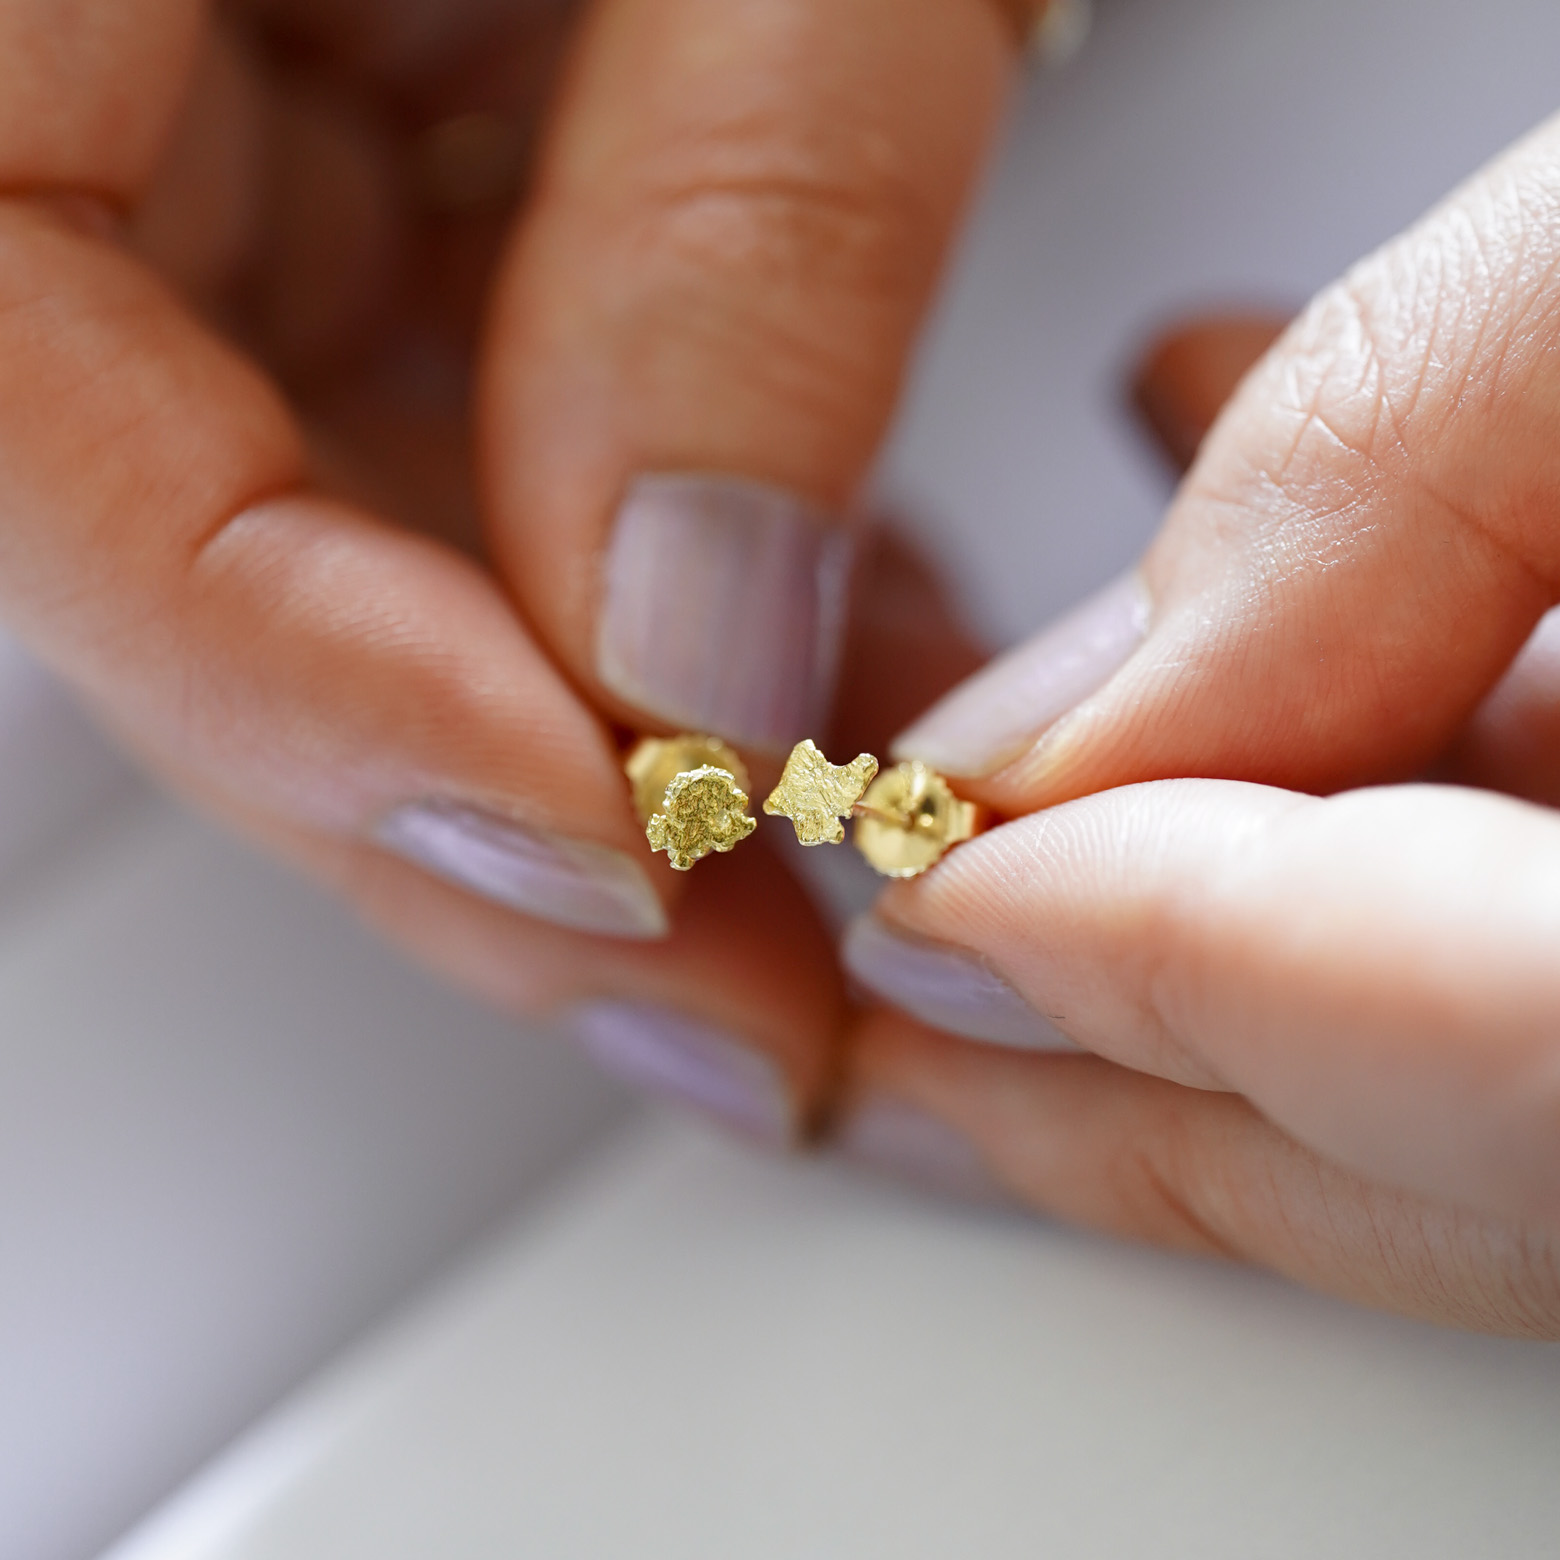 Gold Nugget Earrings - Small - SOURCE objects